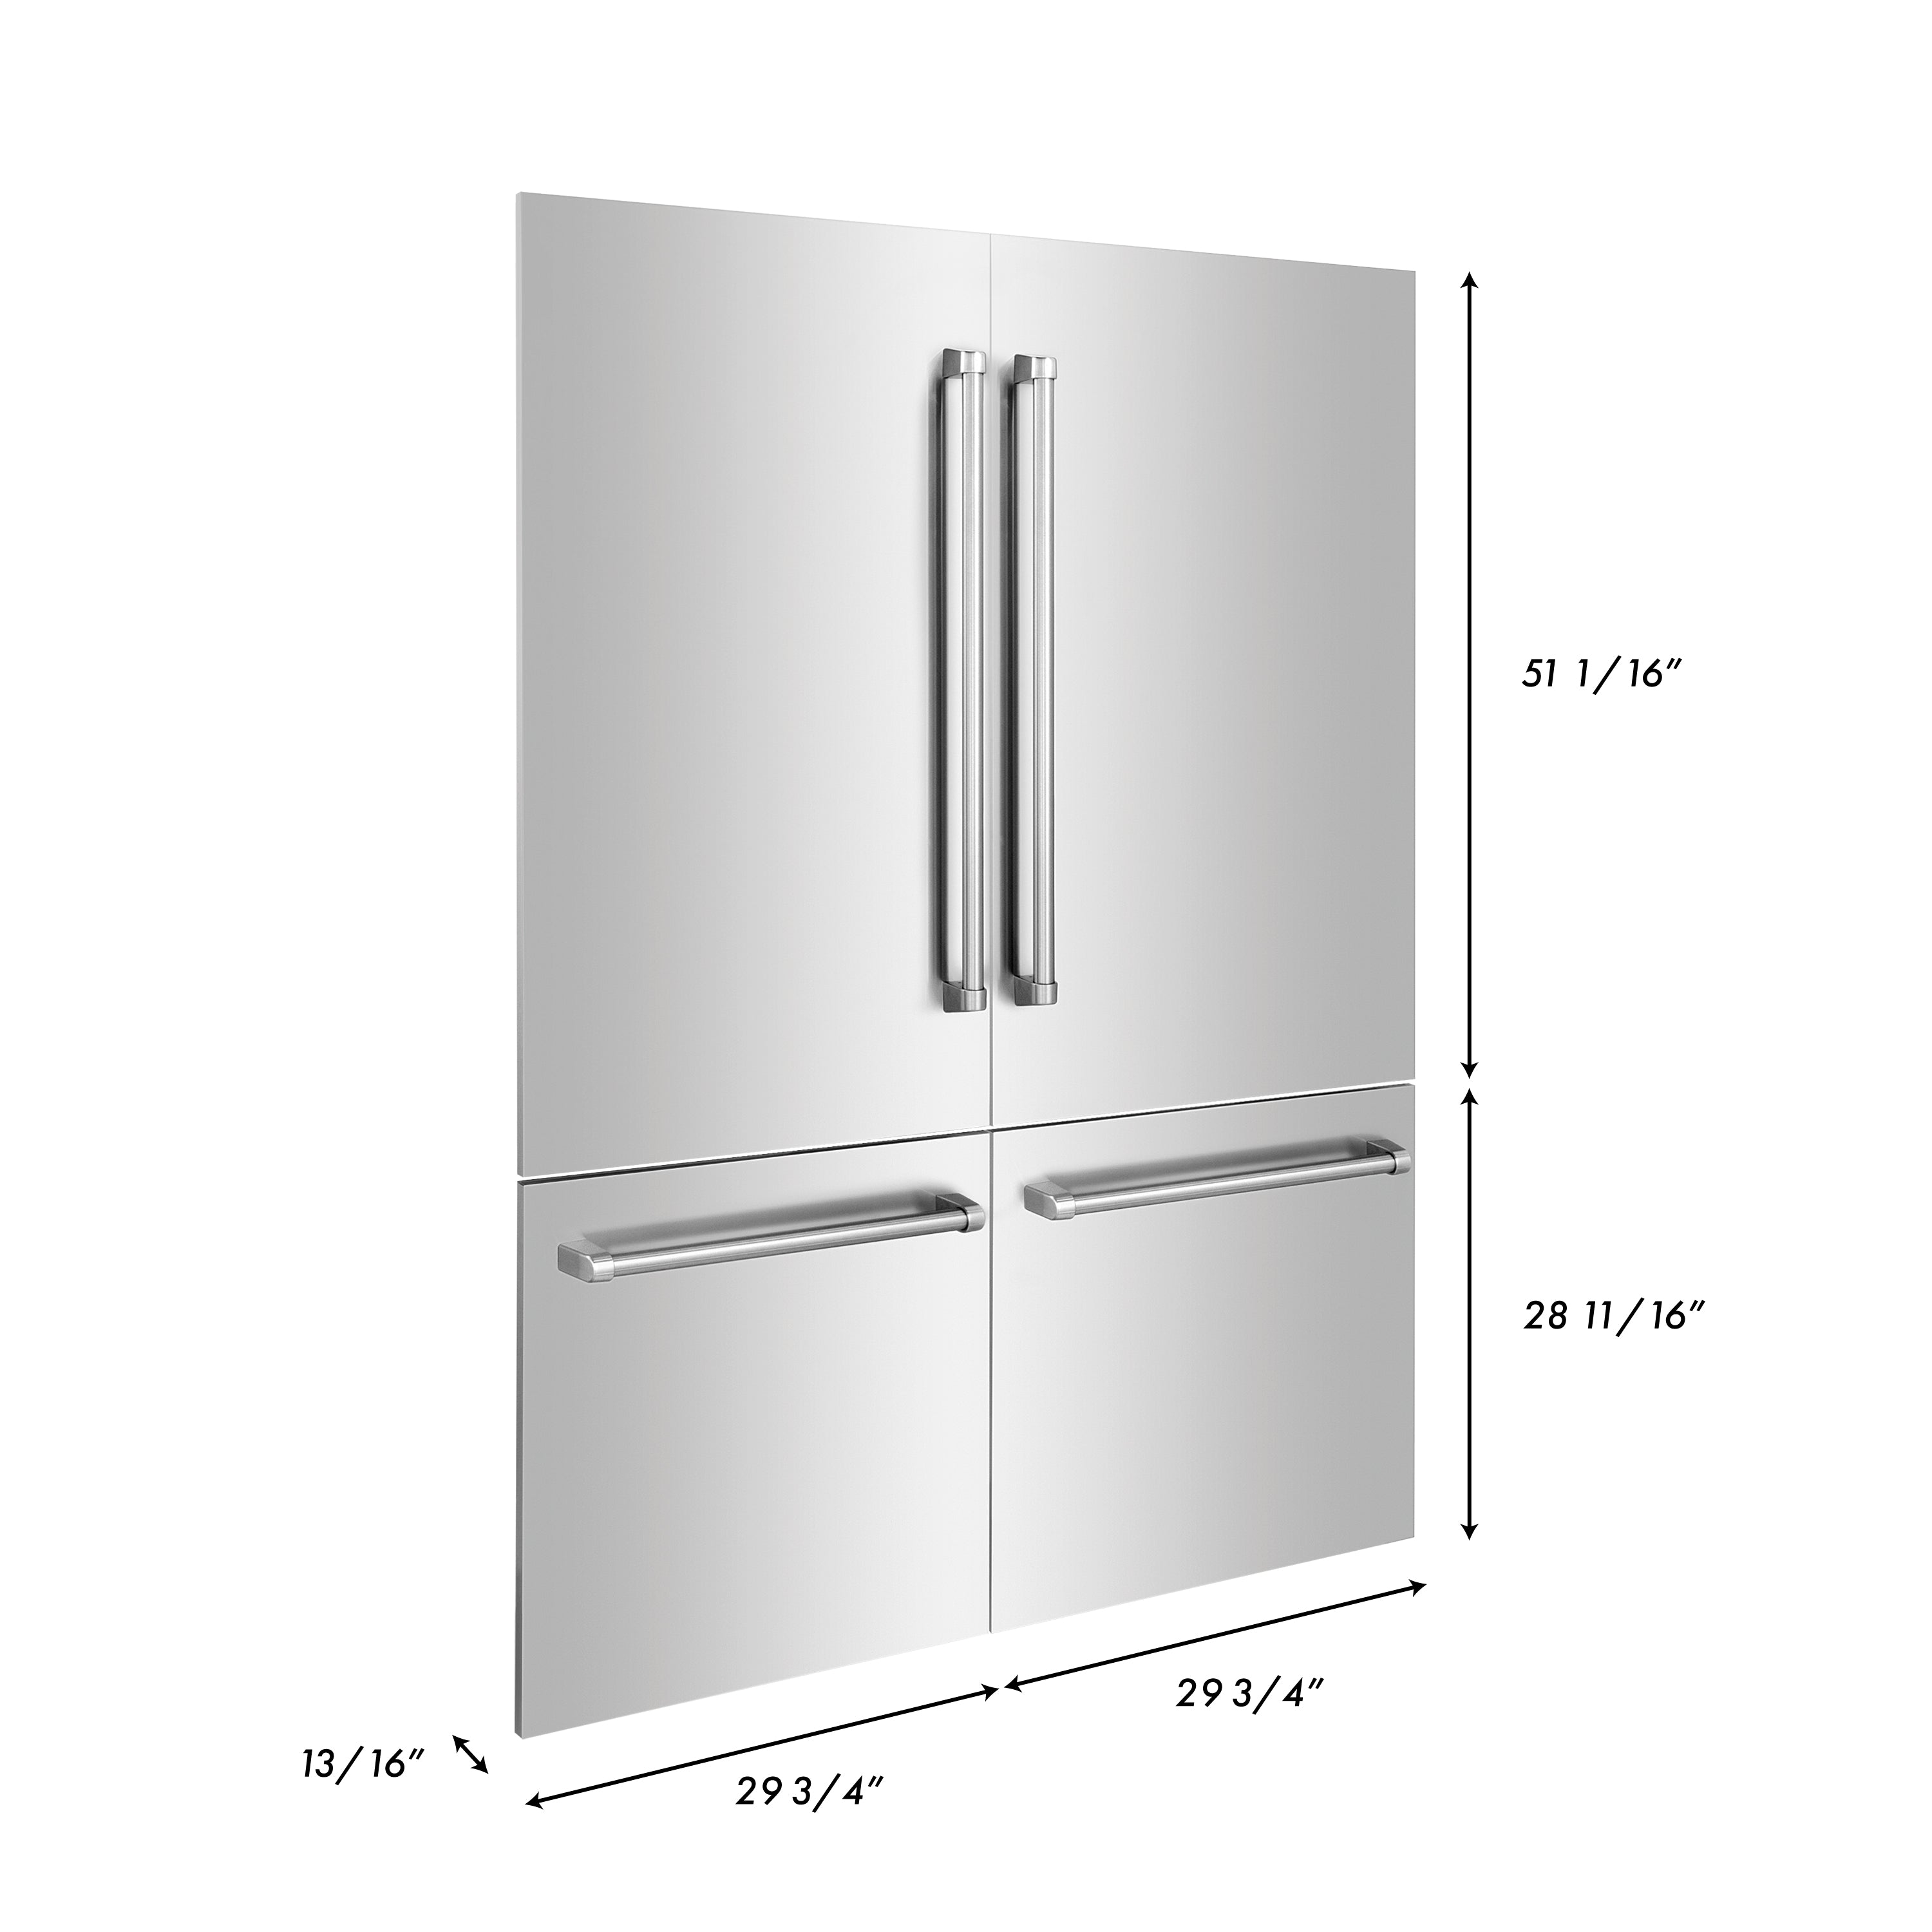 ZLINE 60" Refrigerator Panels in Stainless Steel for a 60" Buit-in Refrigerator (RPBIV-304-60)